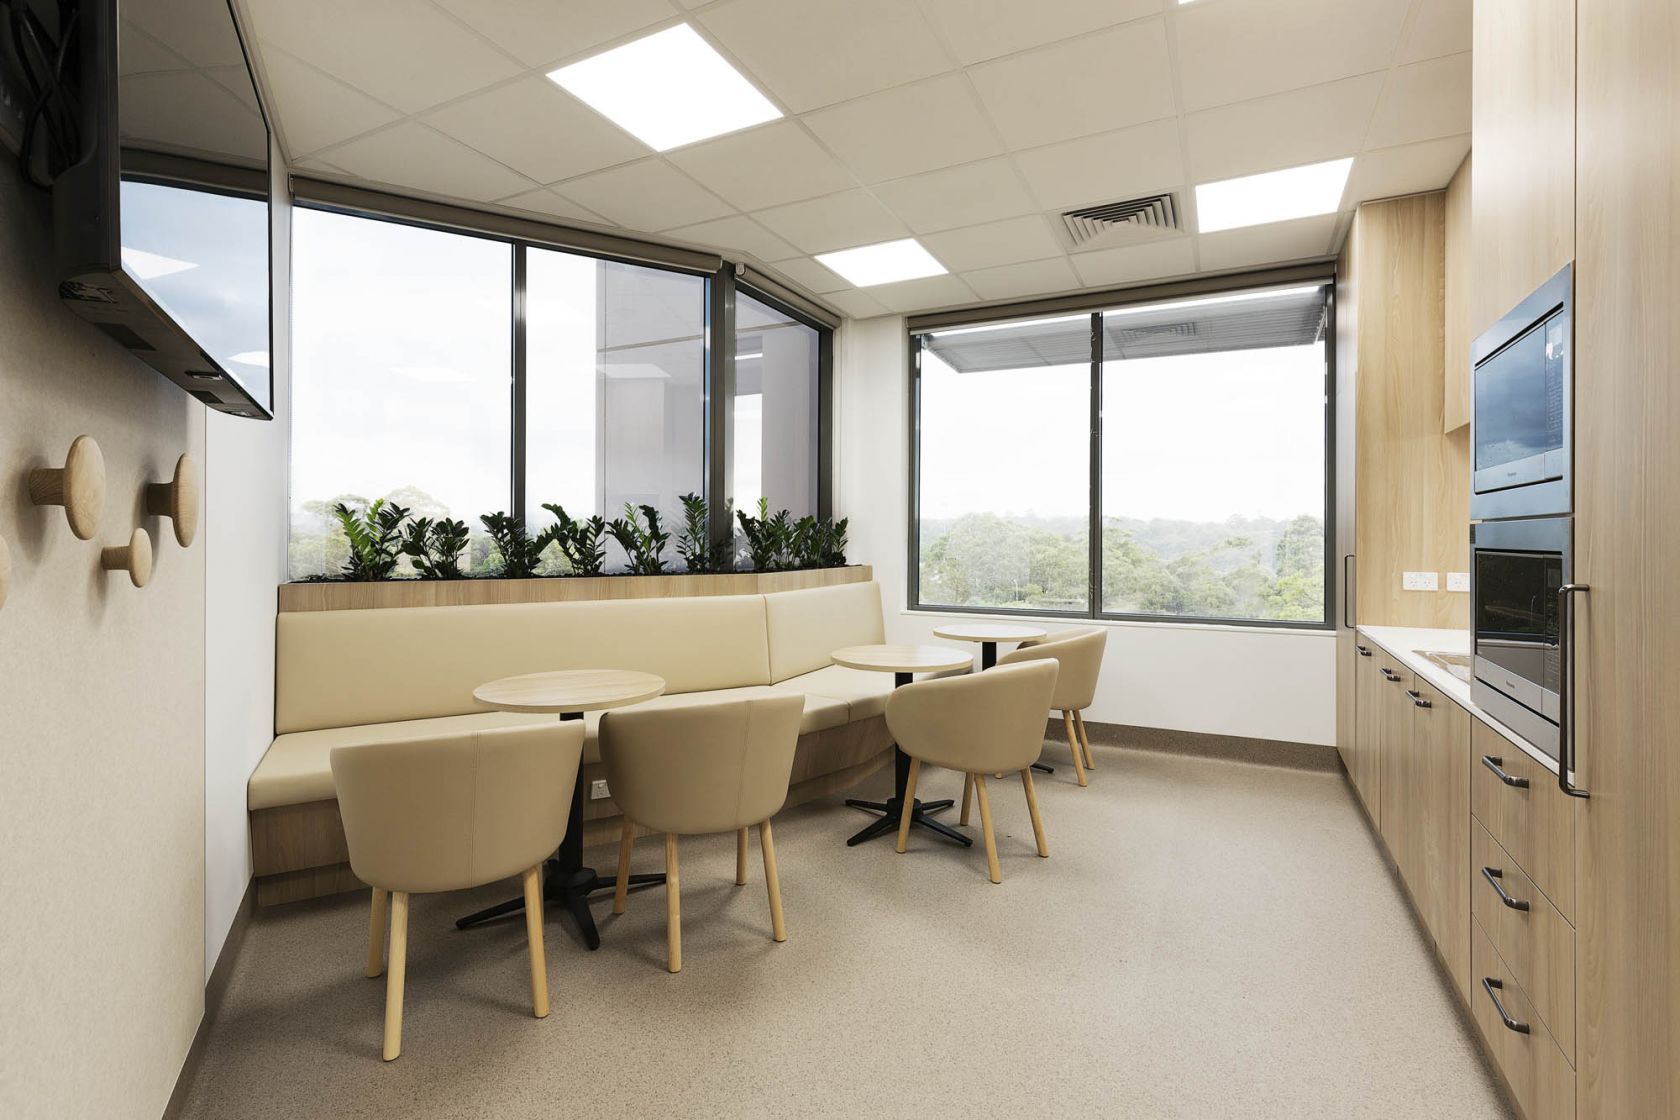 Macquarie Clinic University construction fitout health aged care kitchen lunch breakout dining planters